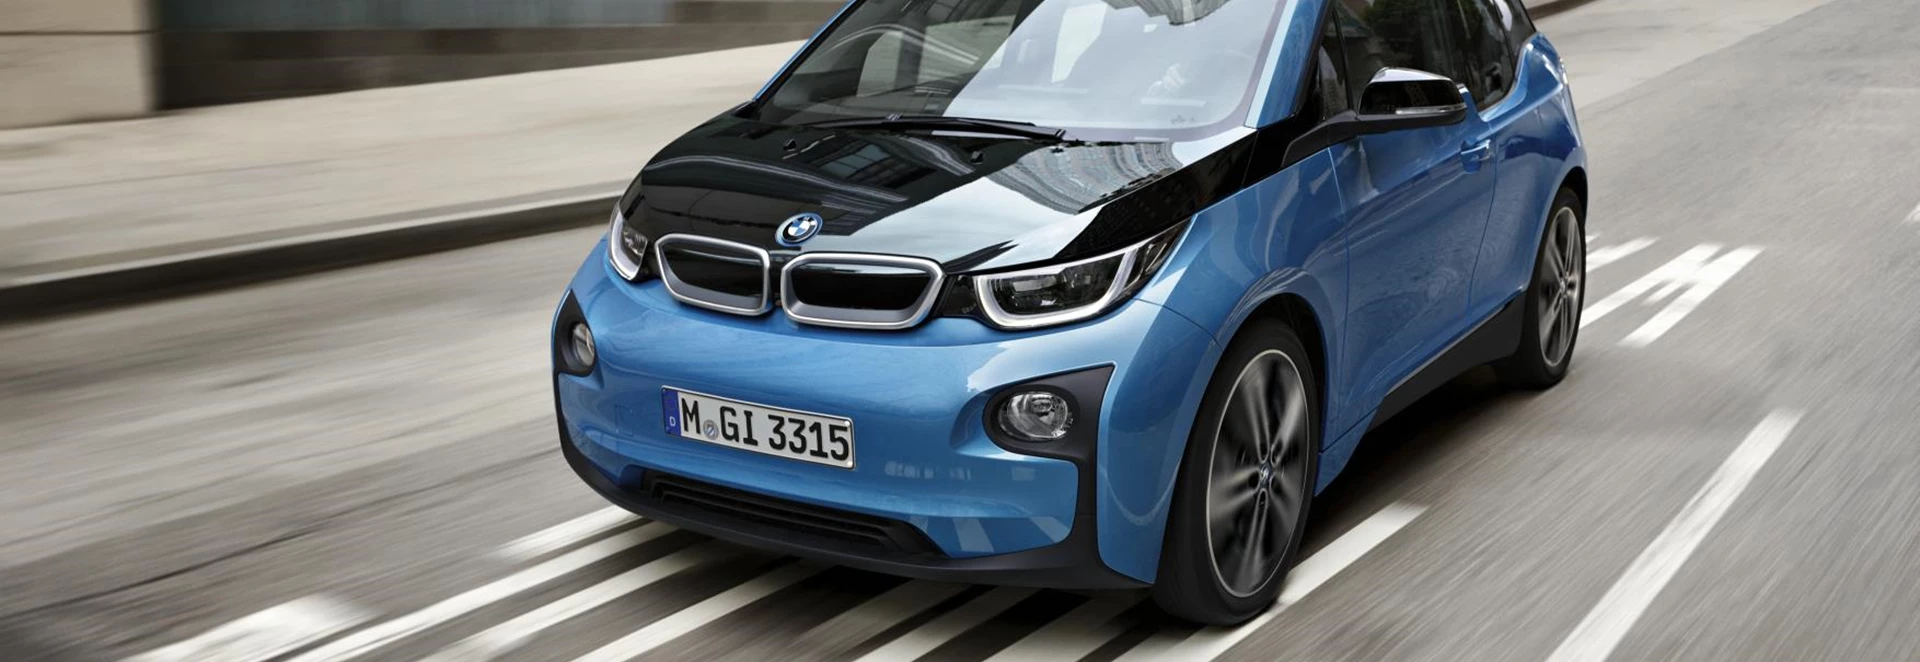 The BMW i3 is getting a serious makeover for next year